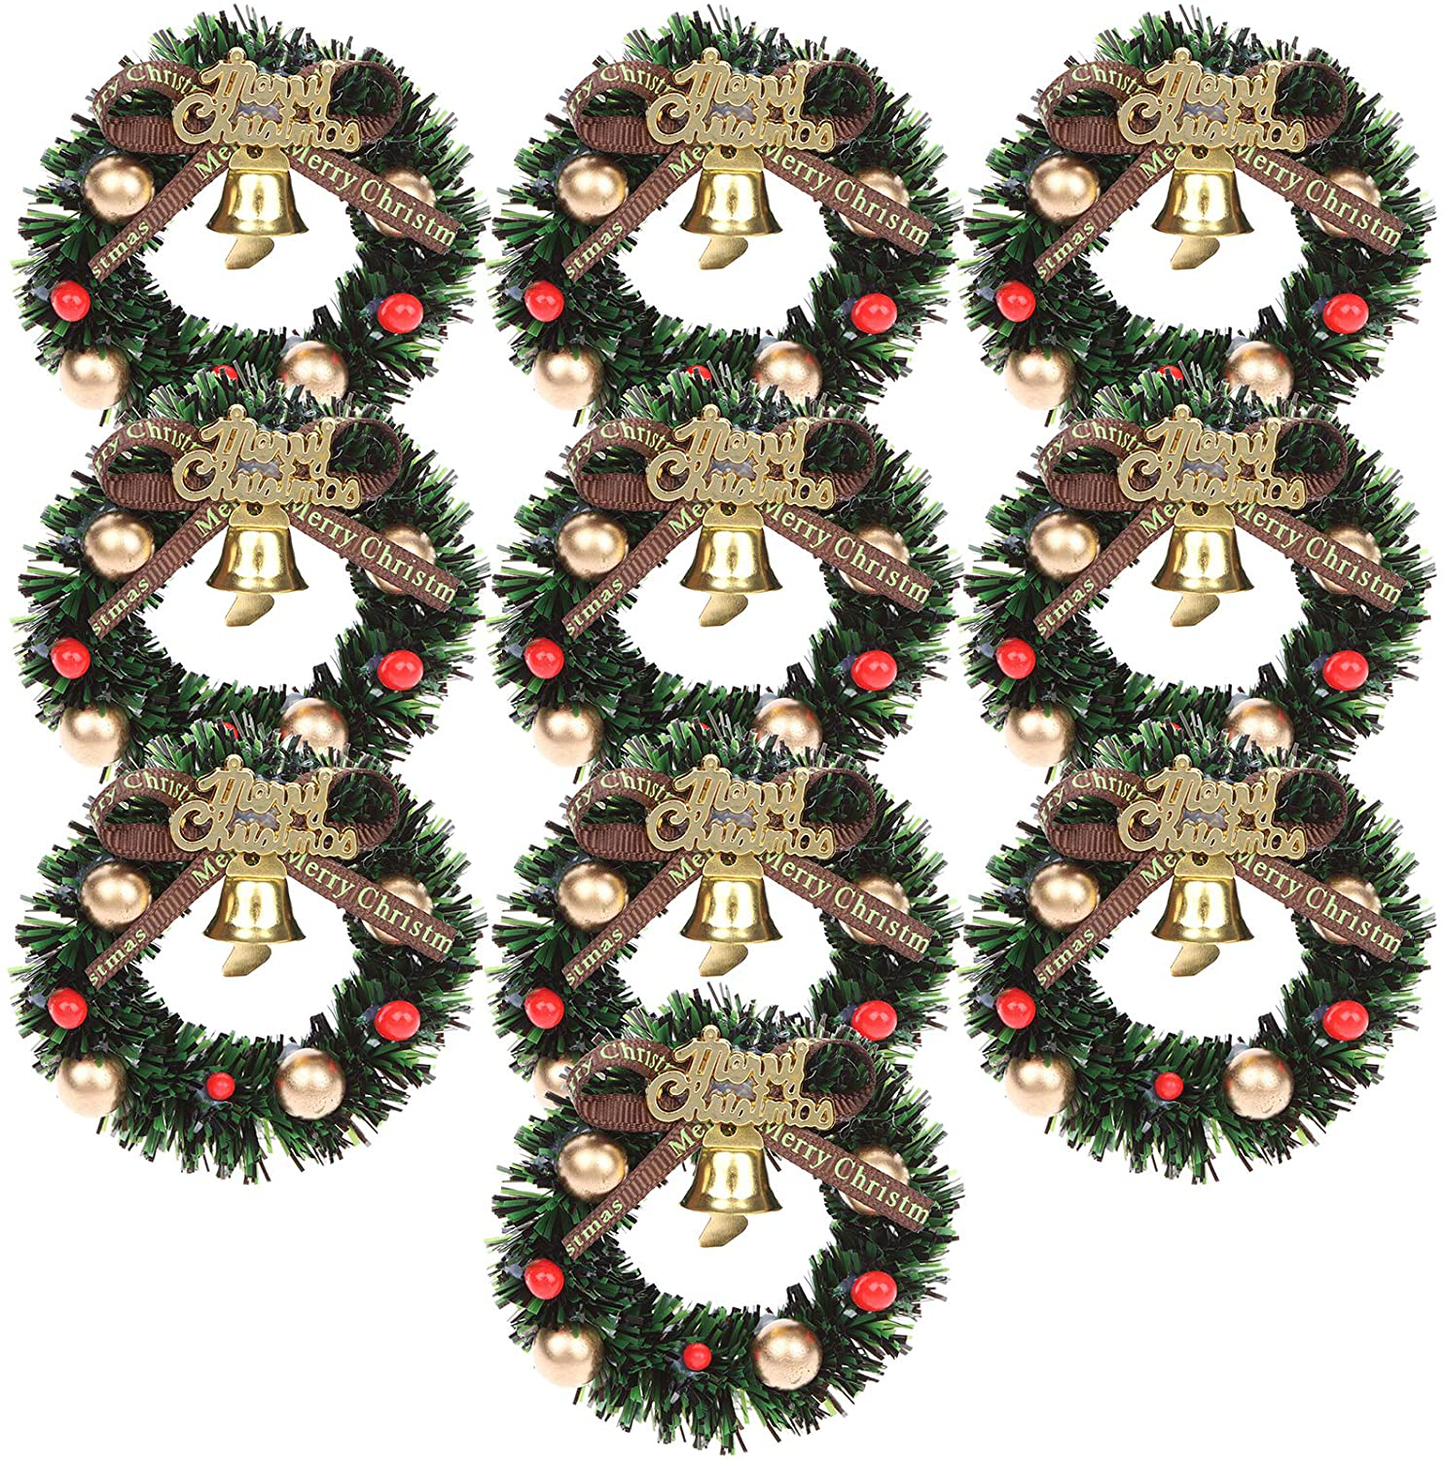 Haomian 10 Pcs Mini Christmas Wreaths Dollhouse Miniature Christmas Tree Decoration Garland Wreath Mini Craft Wreaths Winter Snow Ornaments for Decorating and Model Making